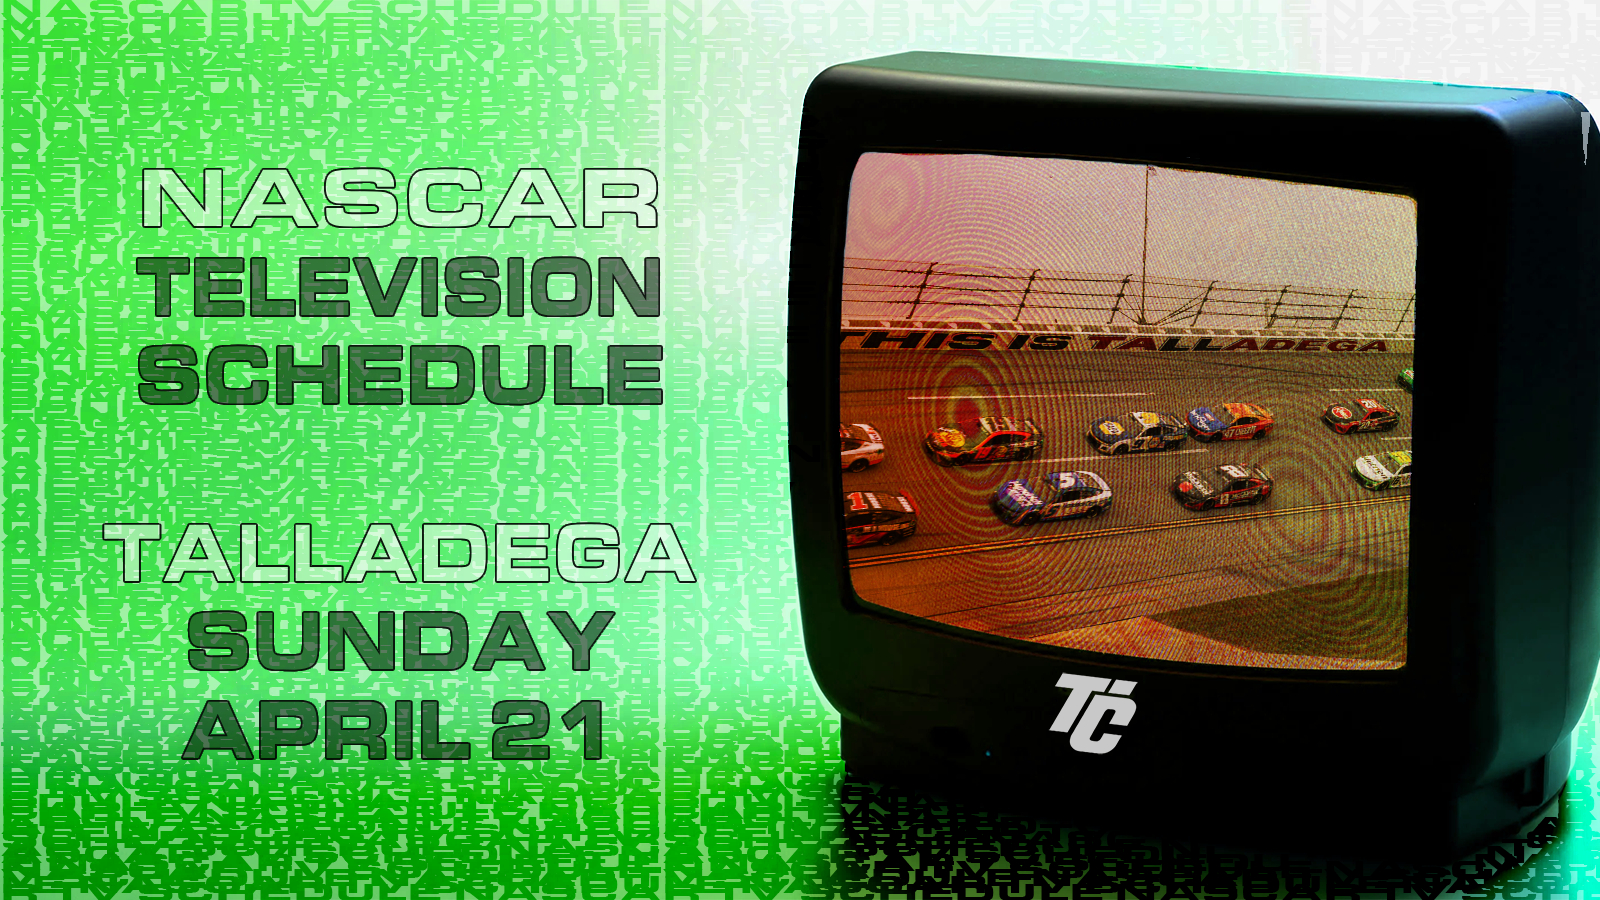 NASCAR TV Schedule Sunday April 21 Talladega Superspeedway GEICO 500 how to watch NASCAR what channel is NASCAR on today?